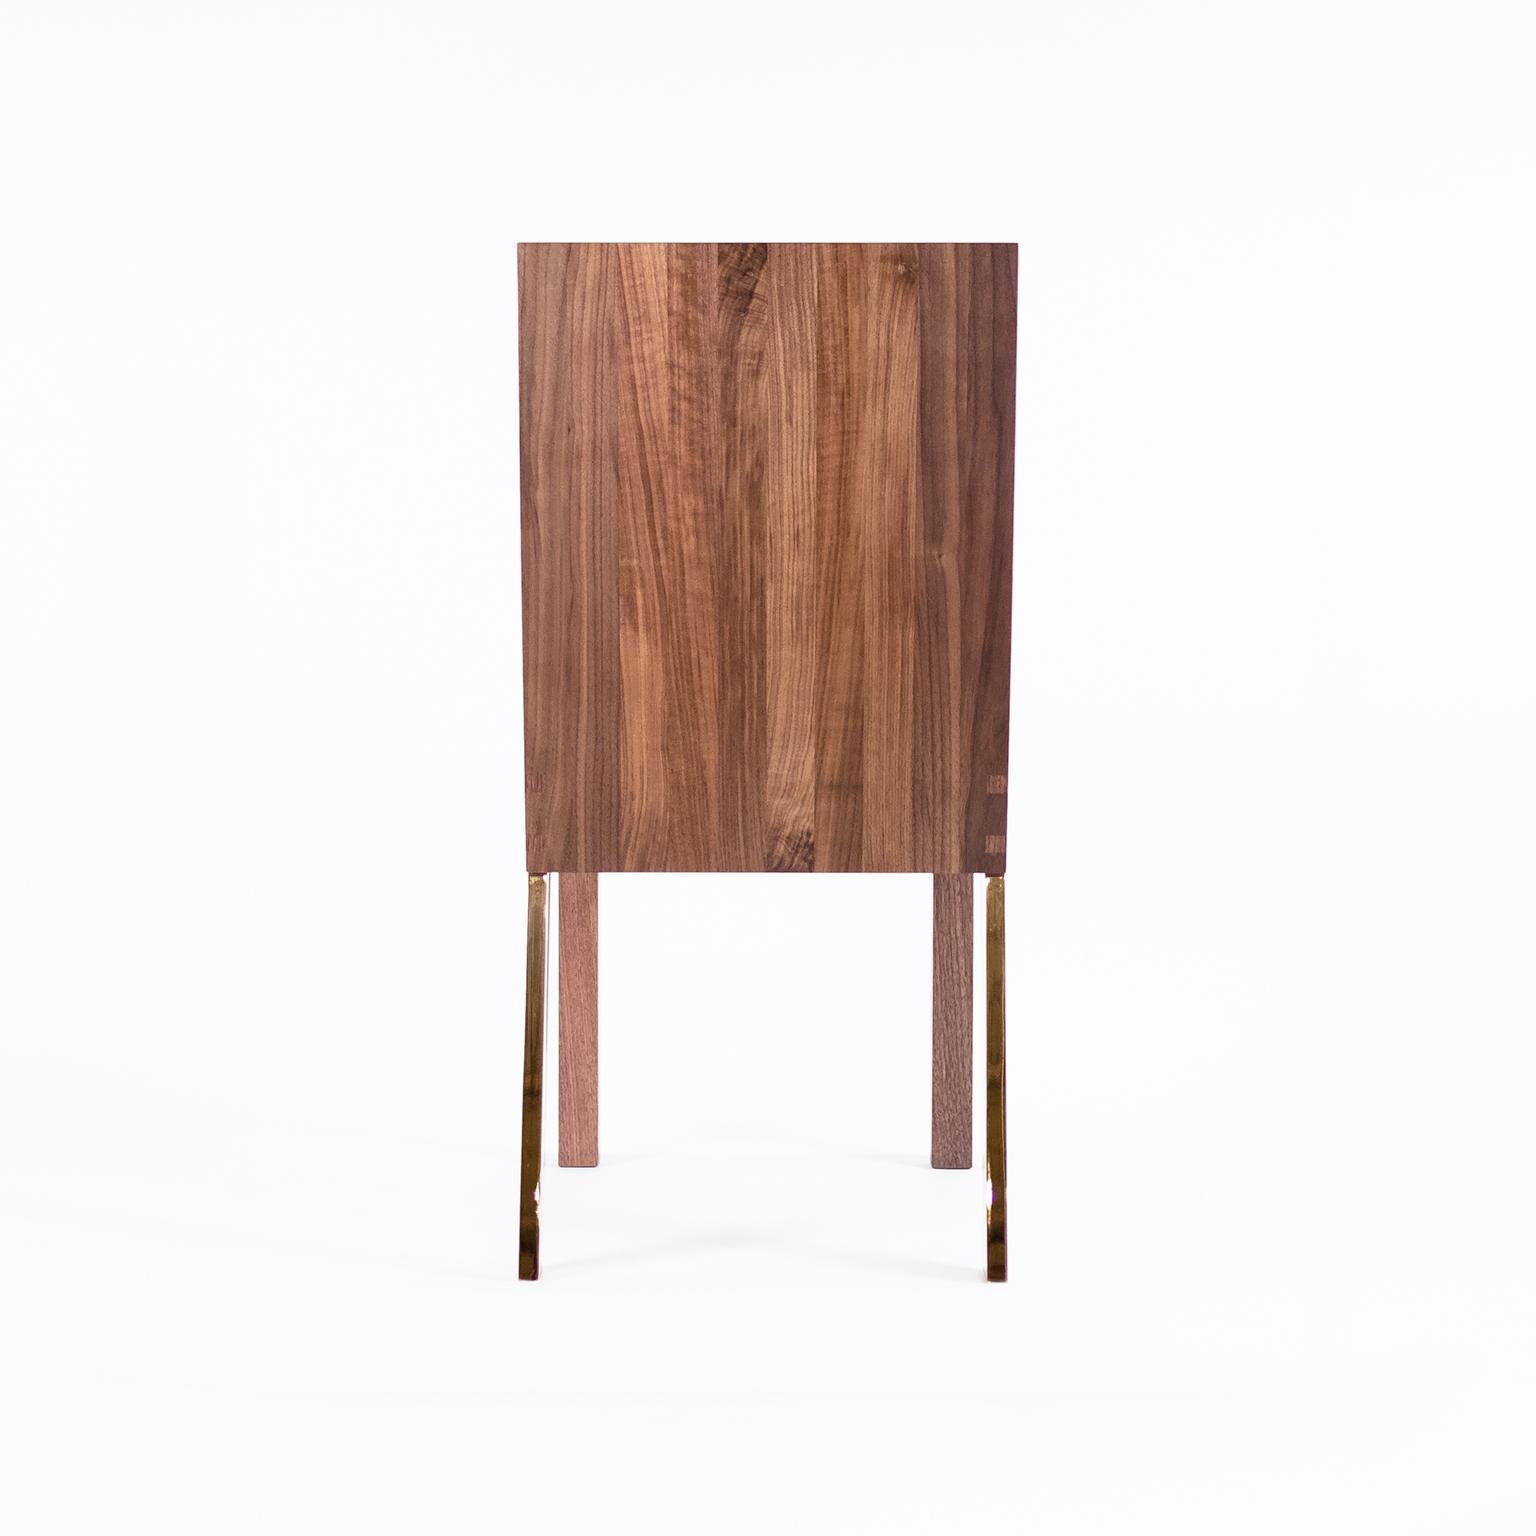 This dining/occasional chair is notable for its nuanced simplicity of form, carefully detailed classic wood joinery and precision steel fabrication.

As the name implies, the 1.5 is the fifth and final iteration of a case study on modular